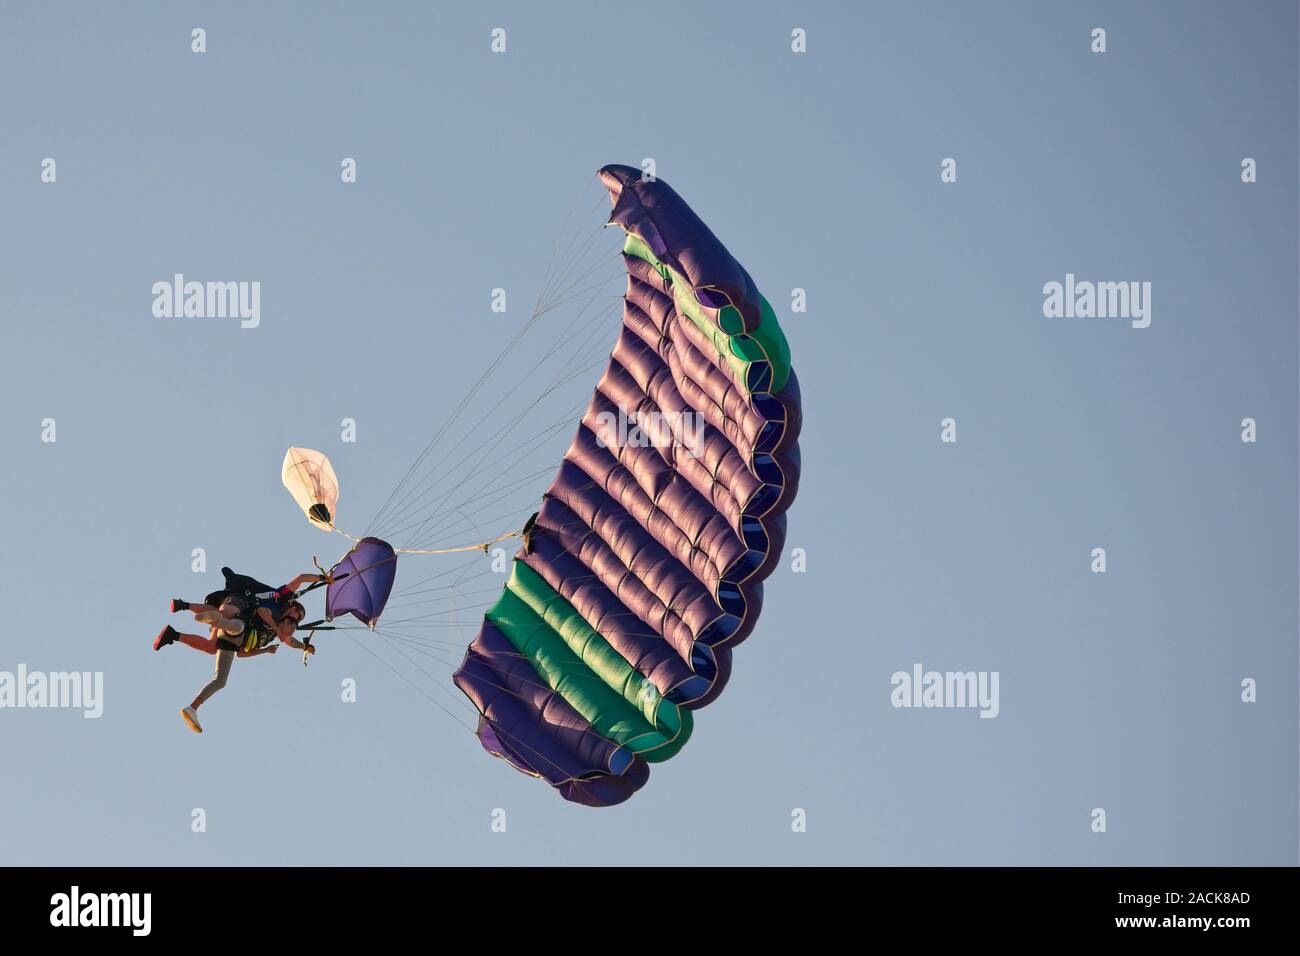 Currimundi, Qld, Australia - September 22, 2019: Tandem skydiving is popular by tourists who visiting the Sunshine Coast. Stock Photo